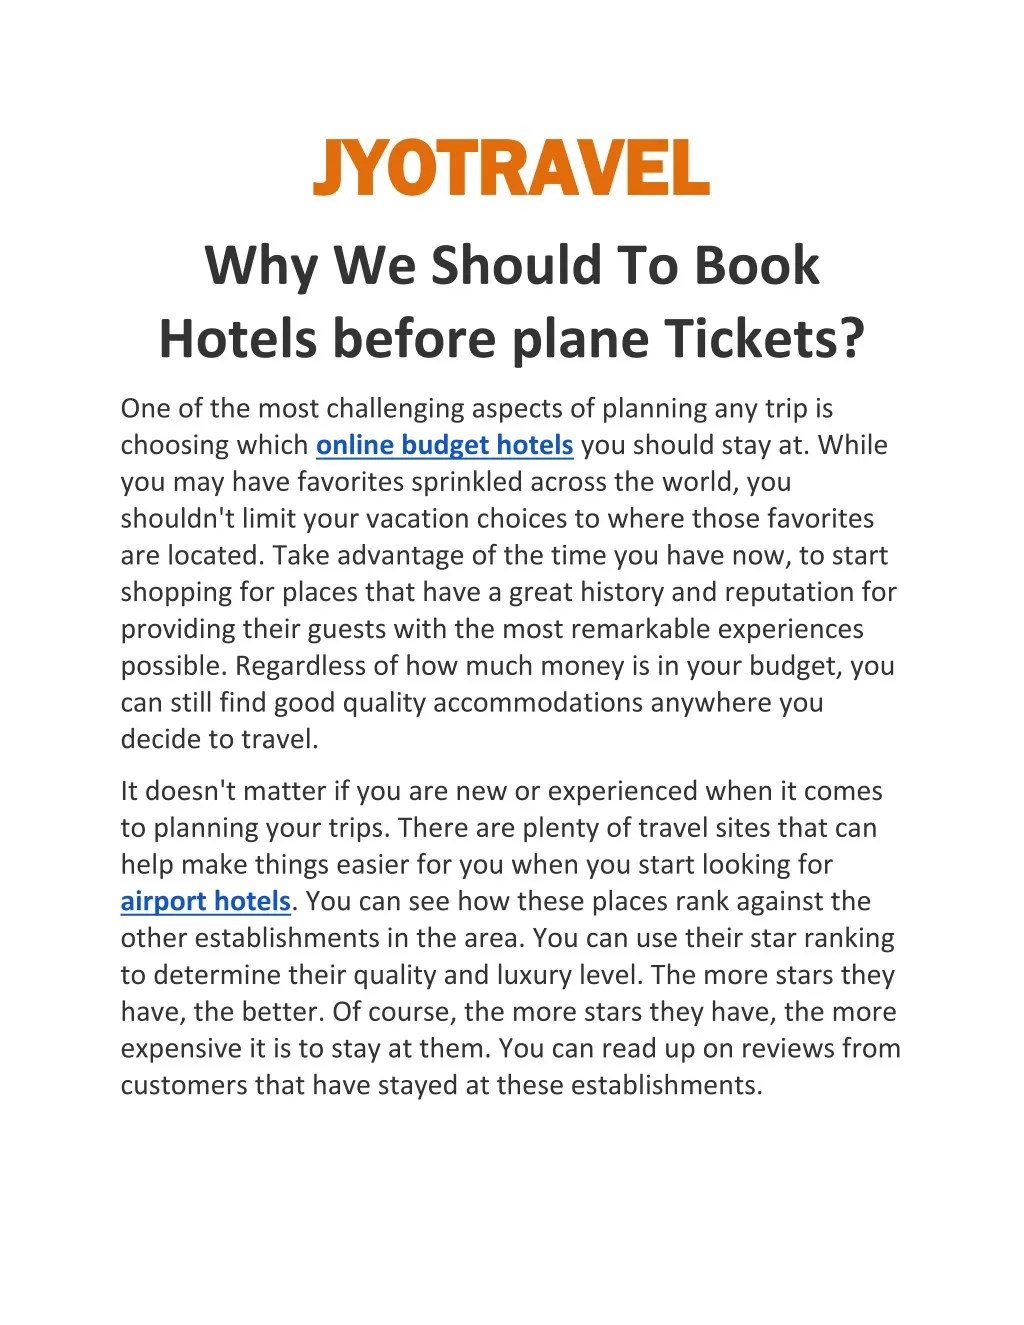 jyotravel jyotravel why we should to book hotels